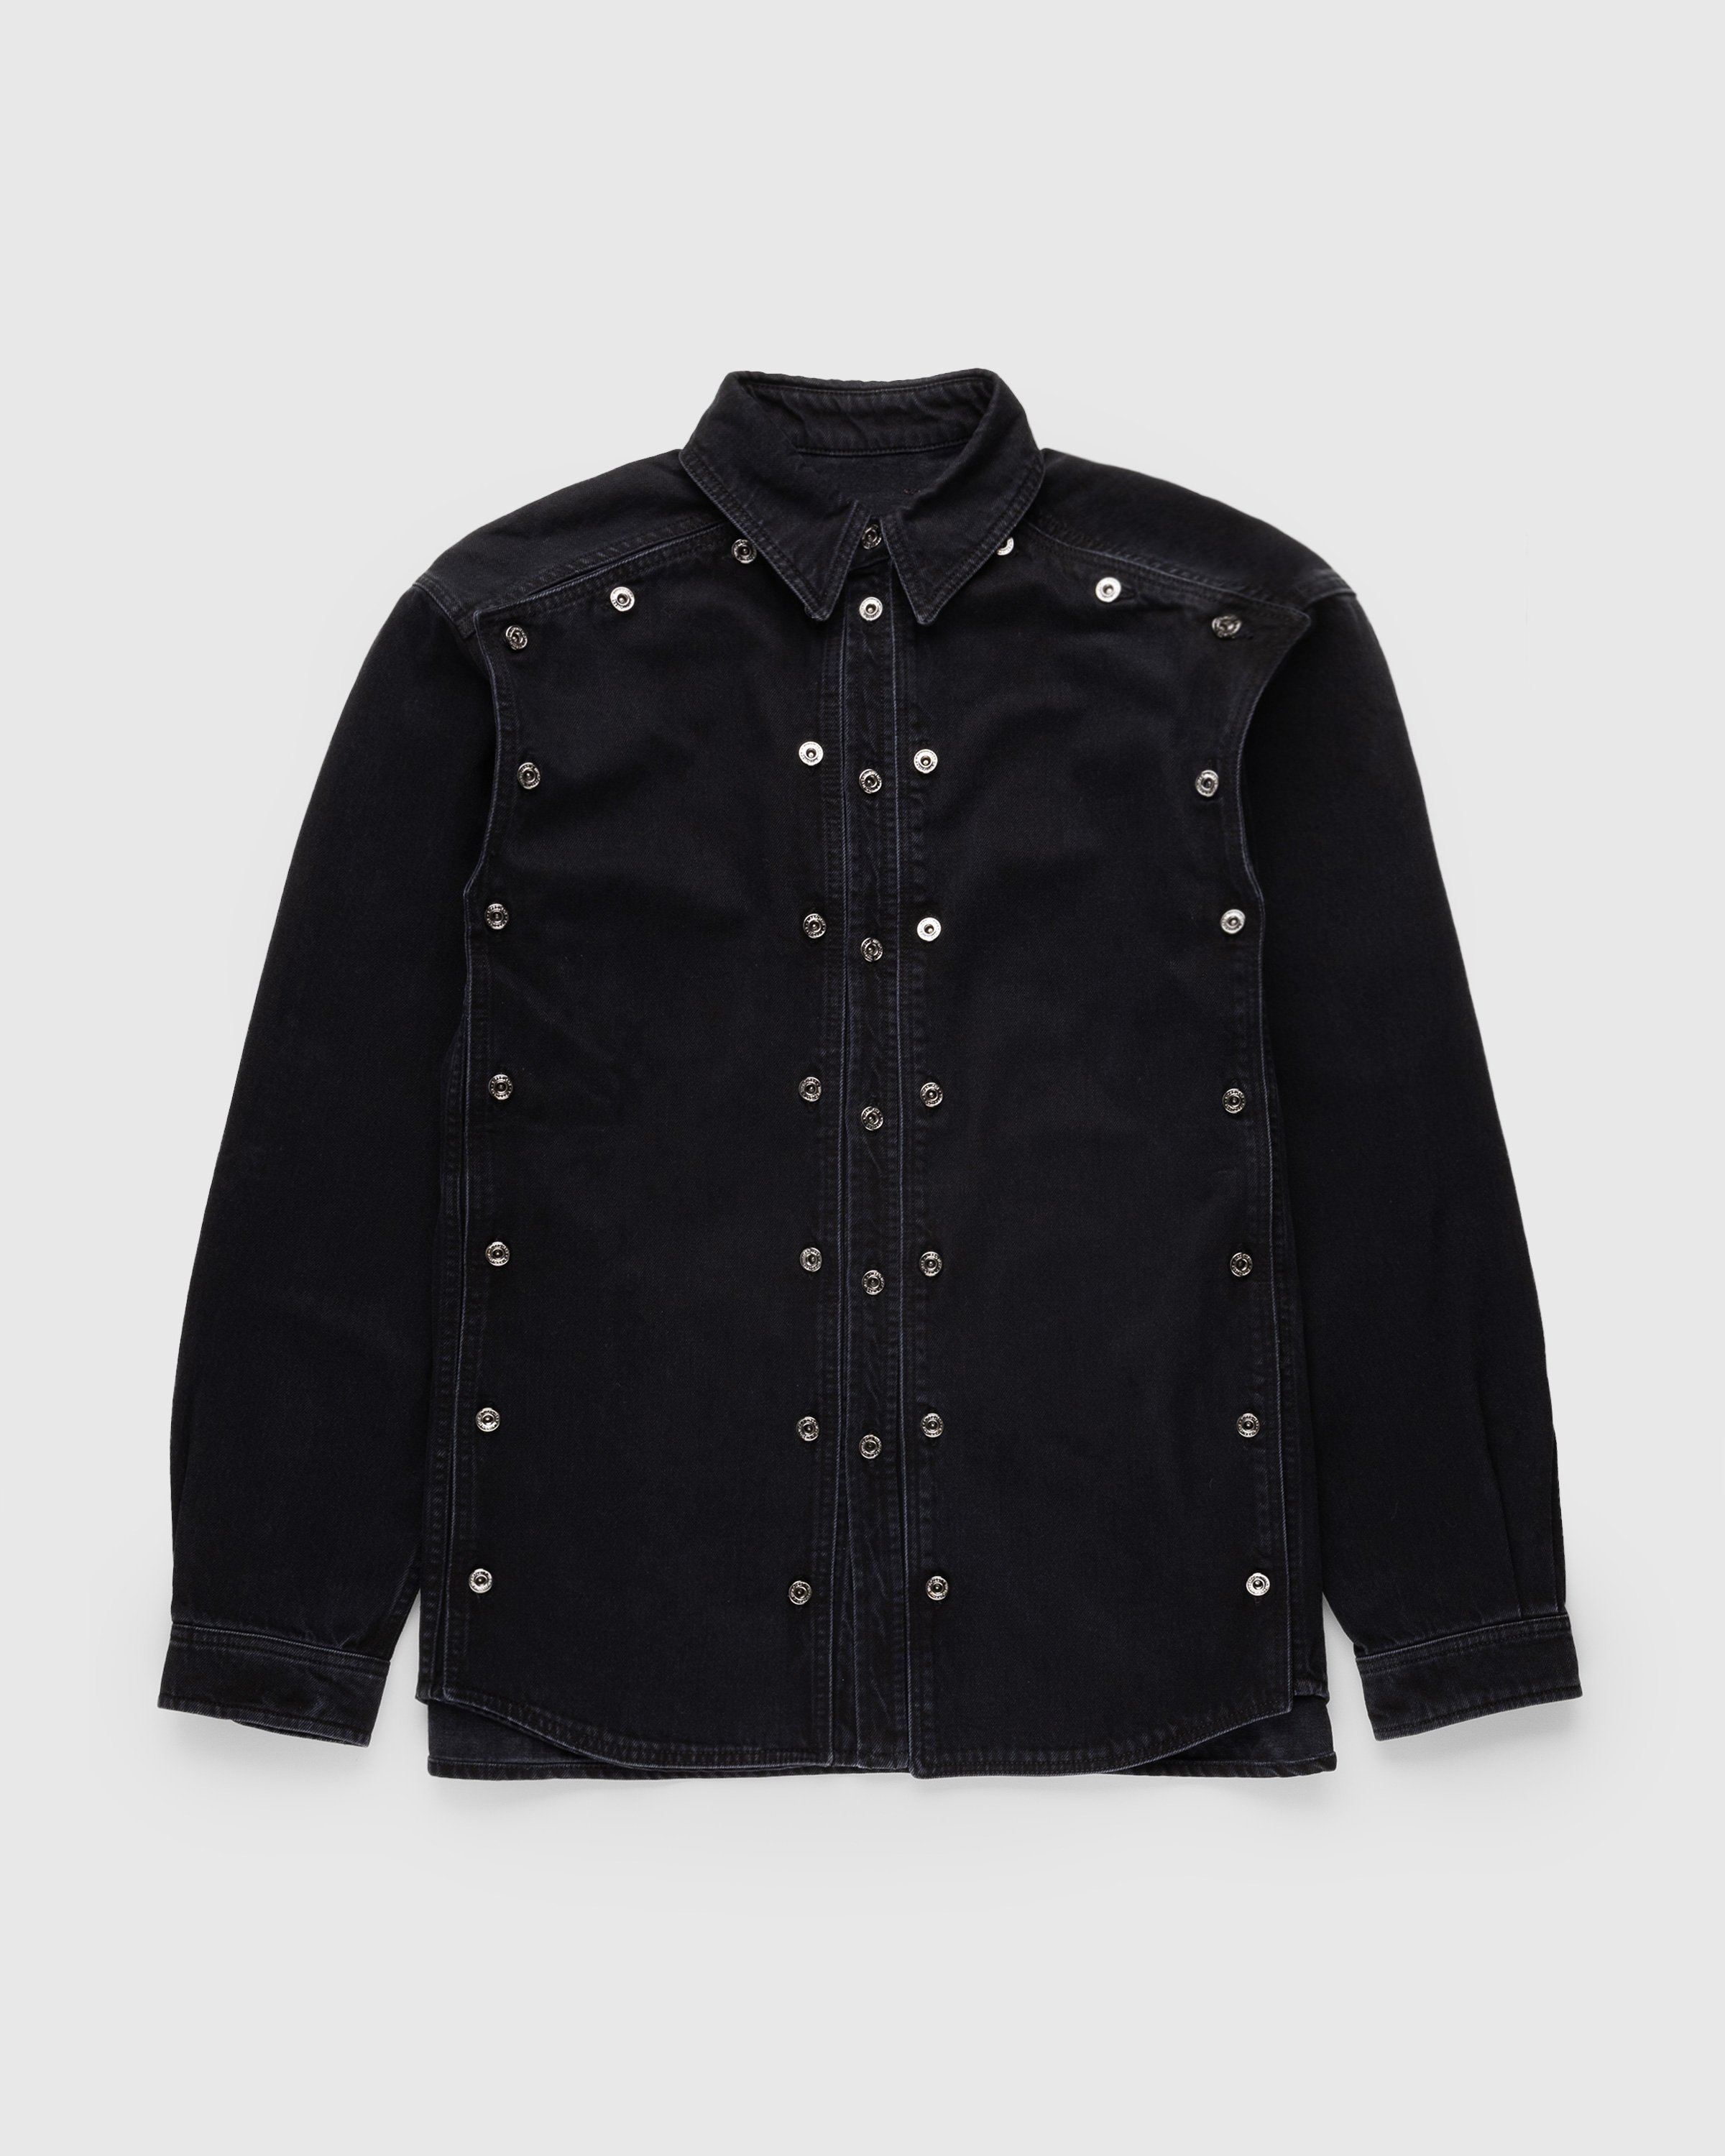 Y/Project - EVERGREEN SNAP OFF DENIM SHIRT - Clothing - Black - Image 1